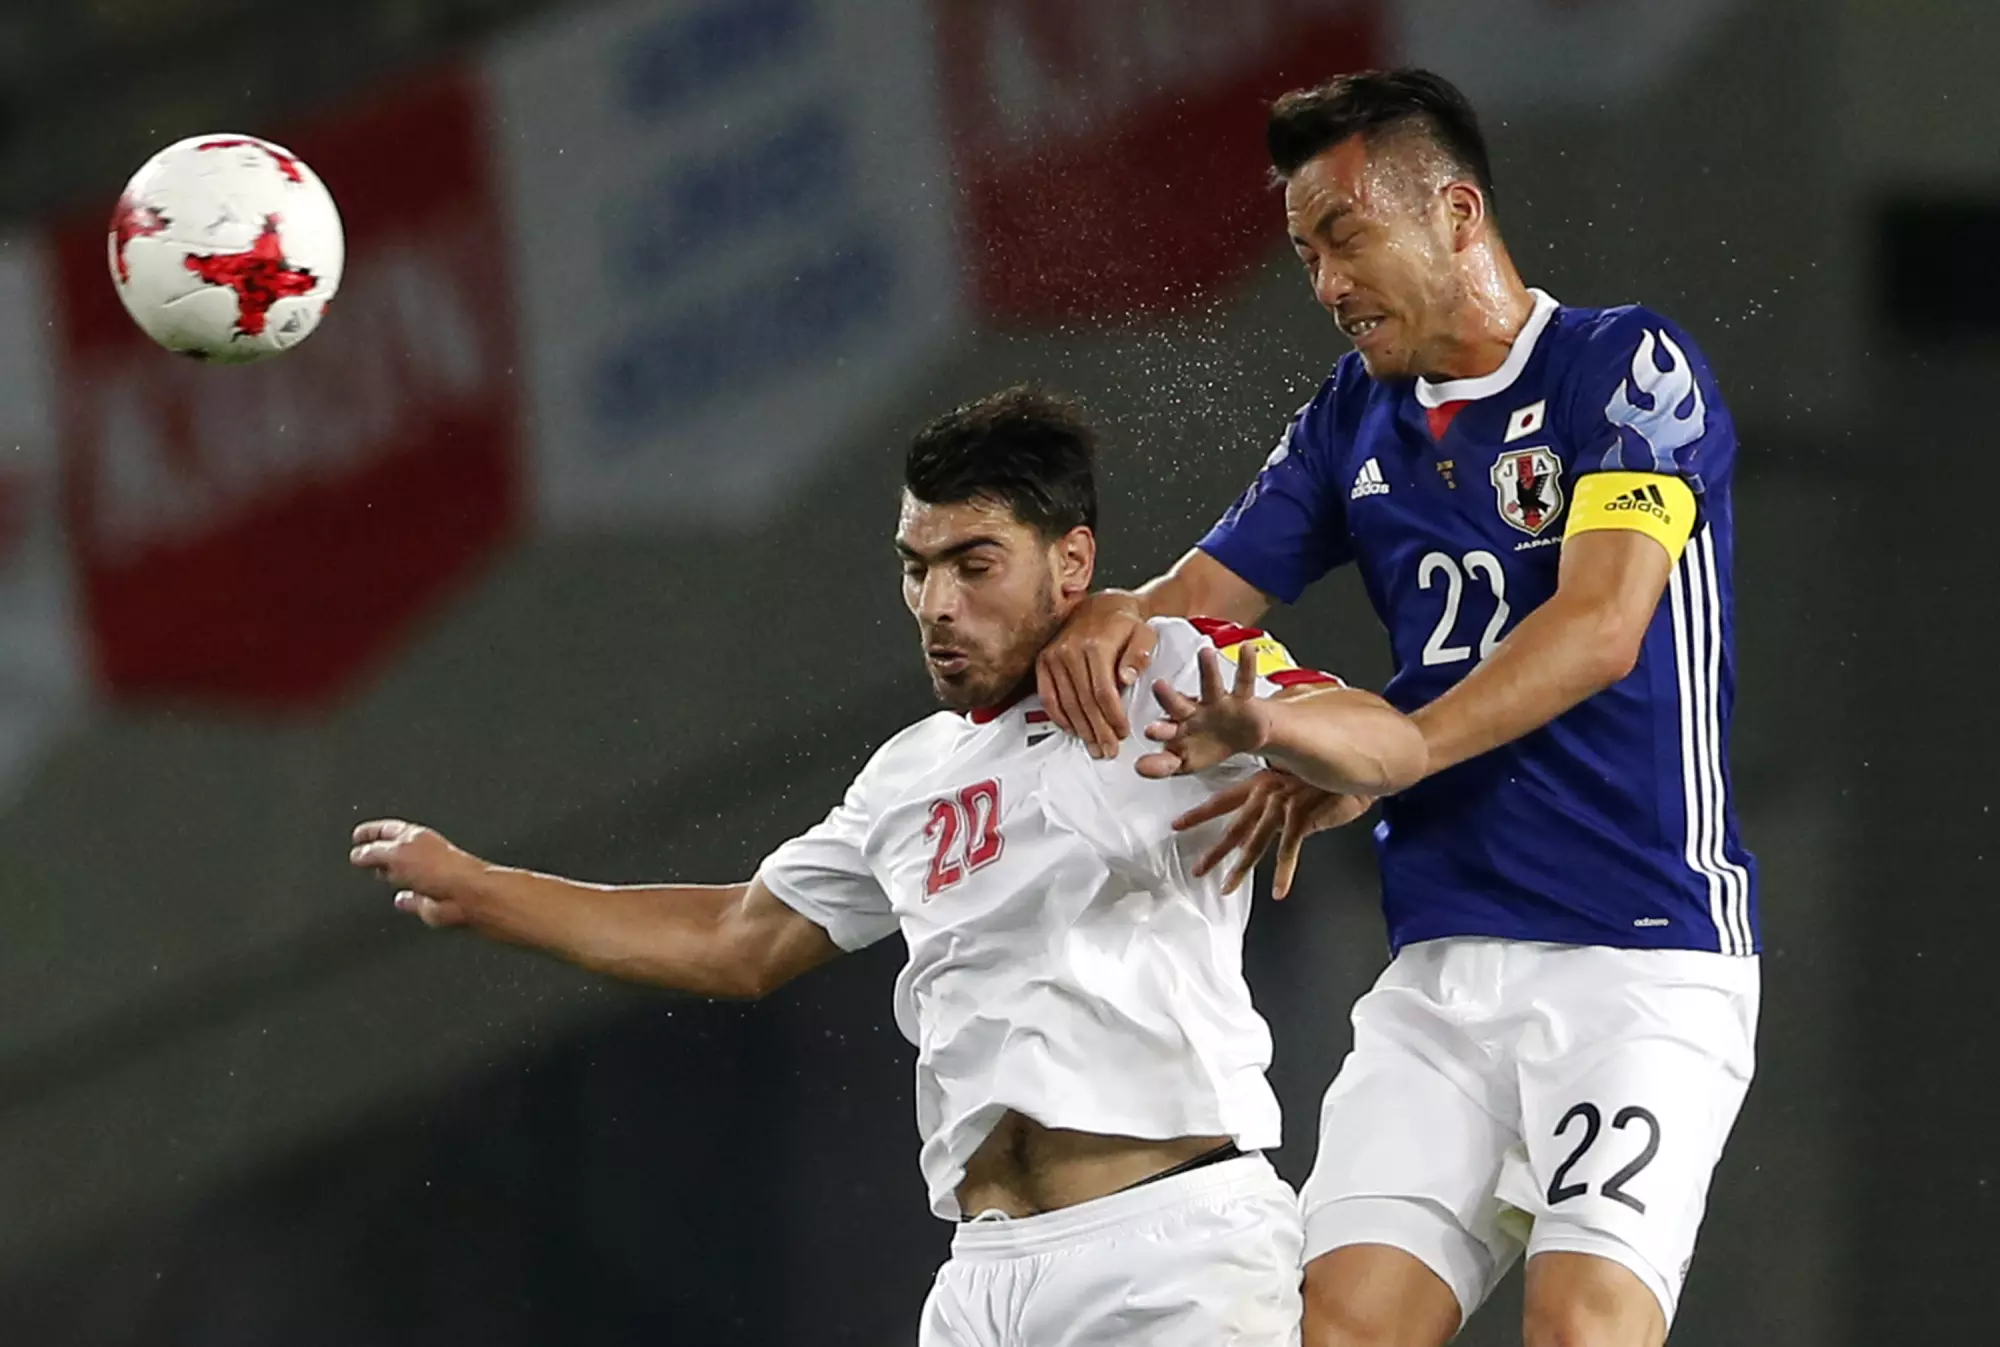 Syria v Japan in 2018 FIFA WC Qualifiers (Image credits - AP)